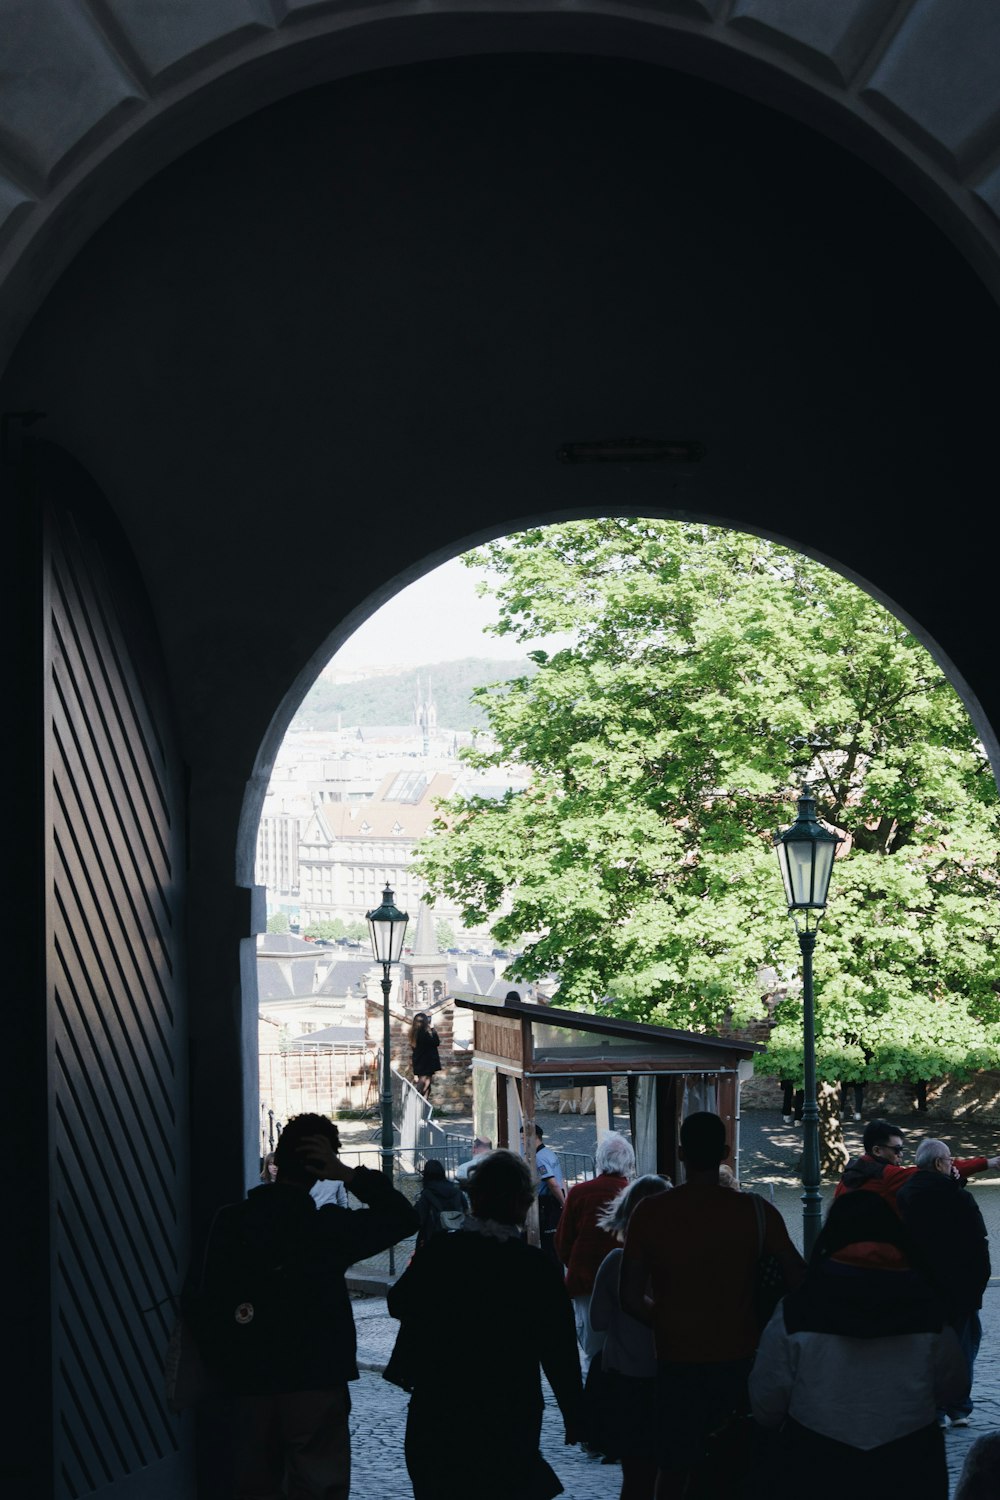 a group of people walking under an archway